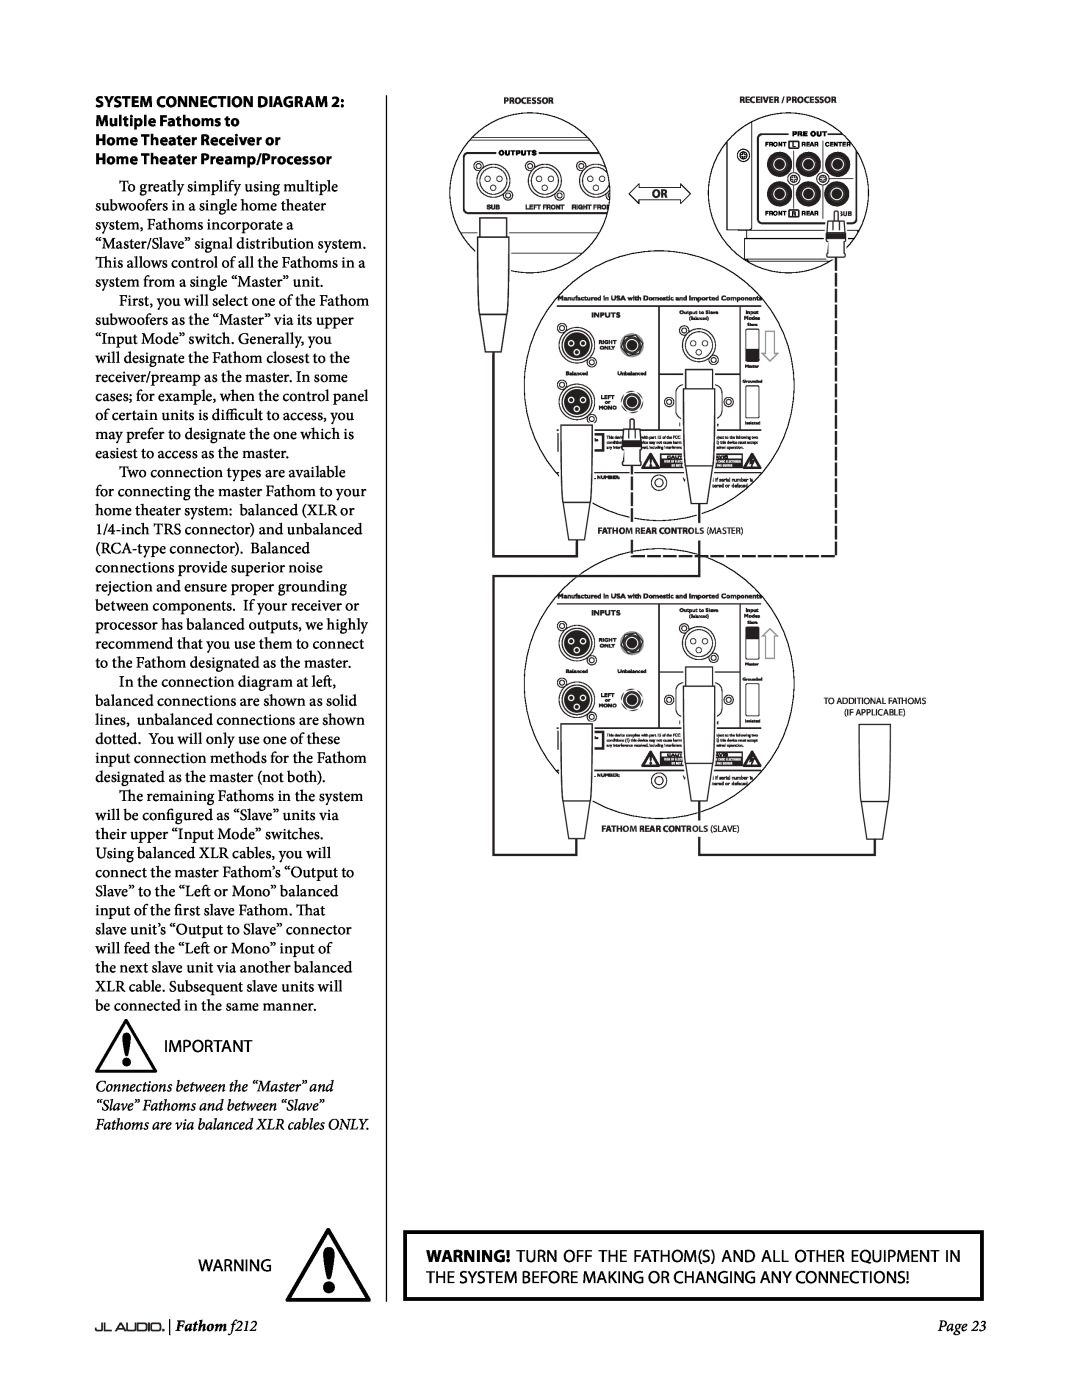 JL Audio f212 SYSTEM CONNECTION DIAGRAM 2 Multiple Fathoms to, Home Theater Receiver or, Home Theater Preamp/Processor 